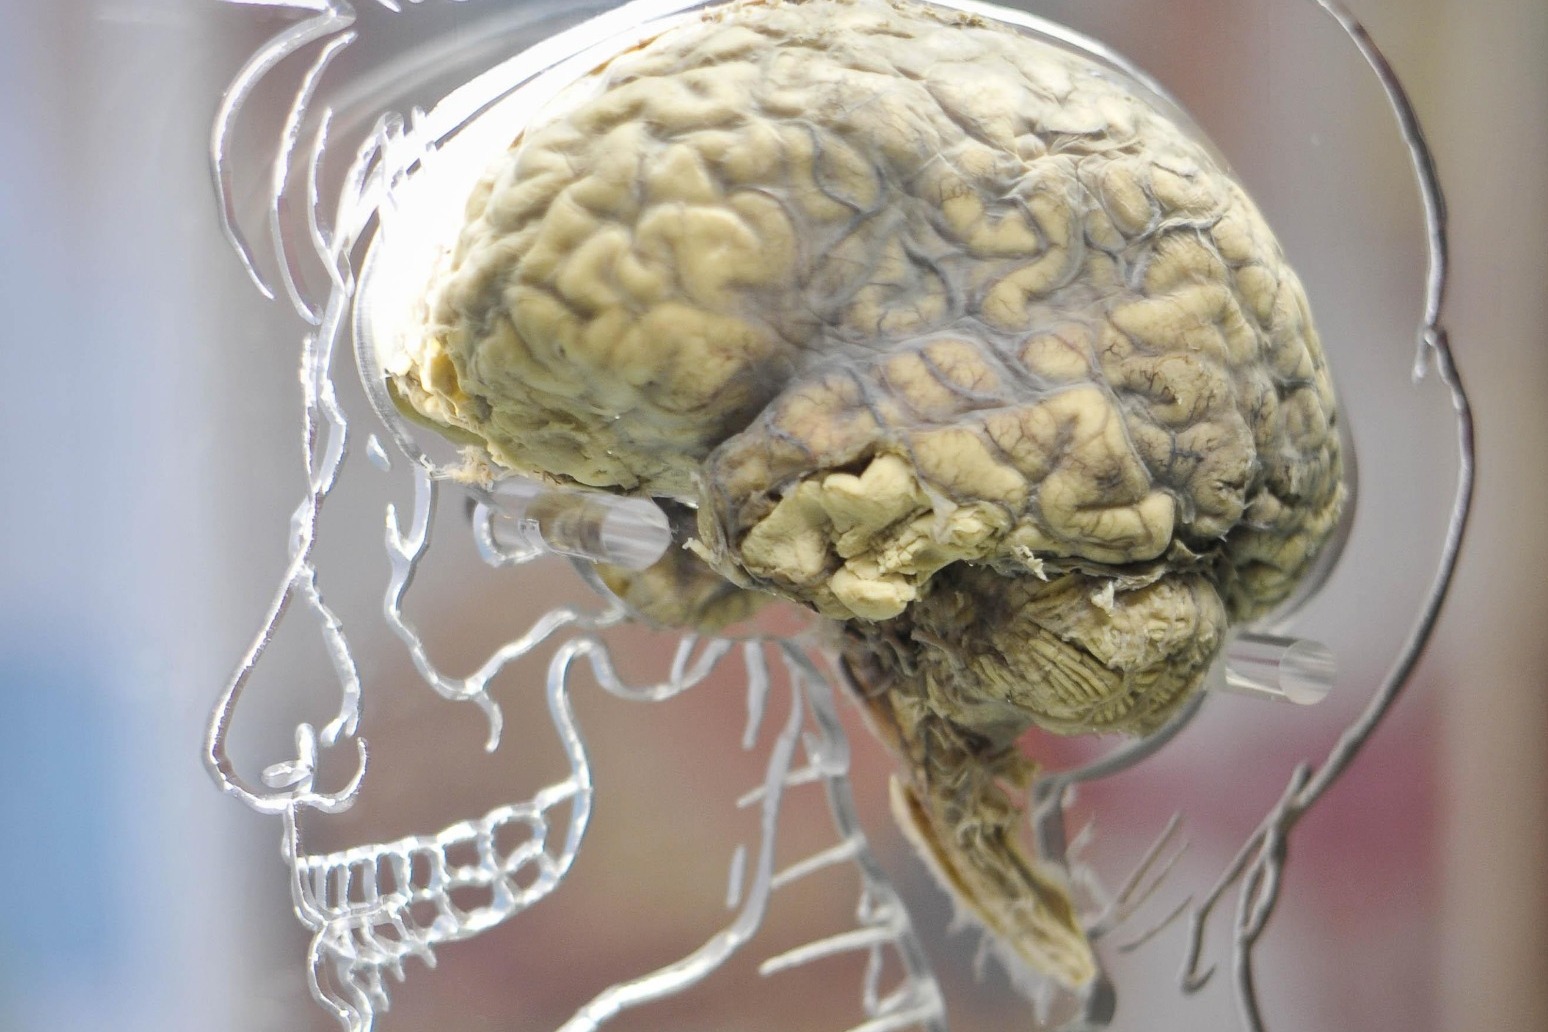 45% of people with concussion show brain injury symptoms six months later 